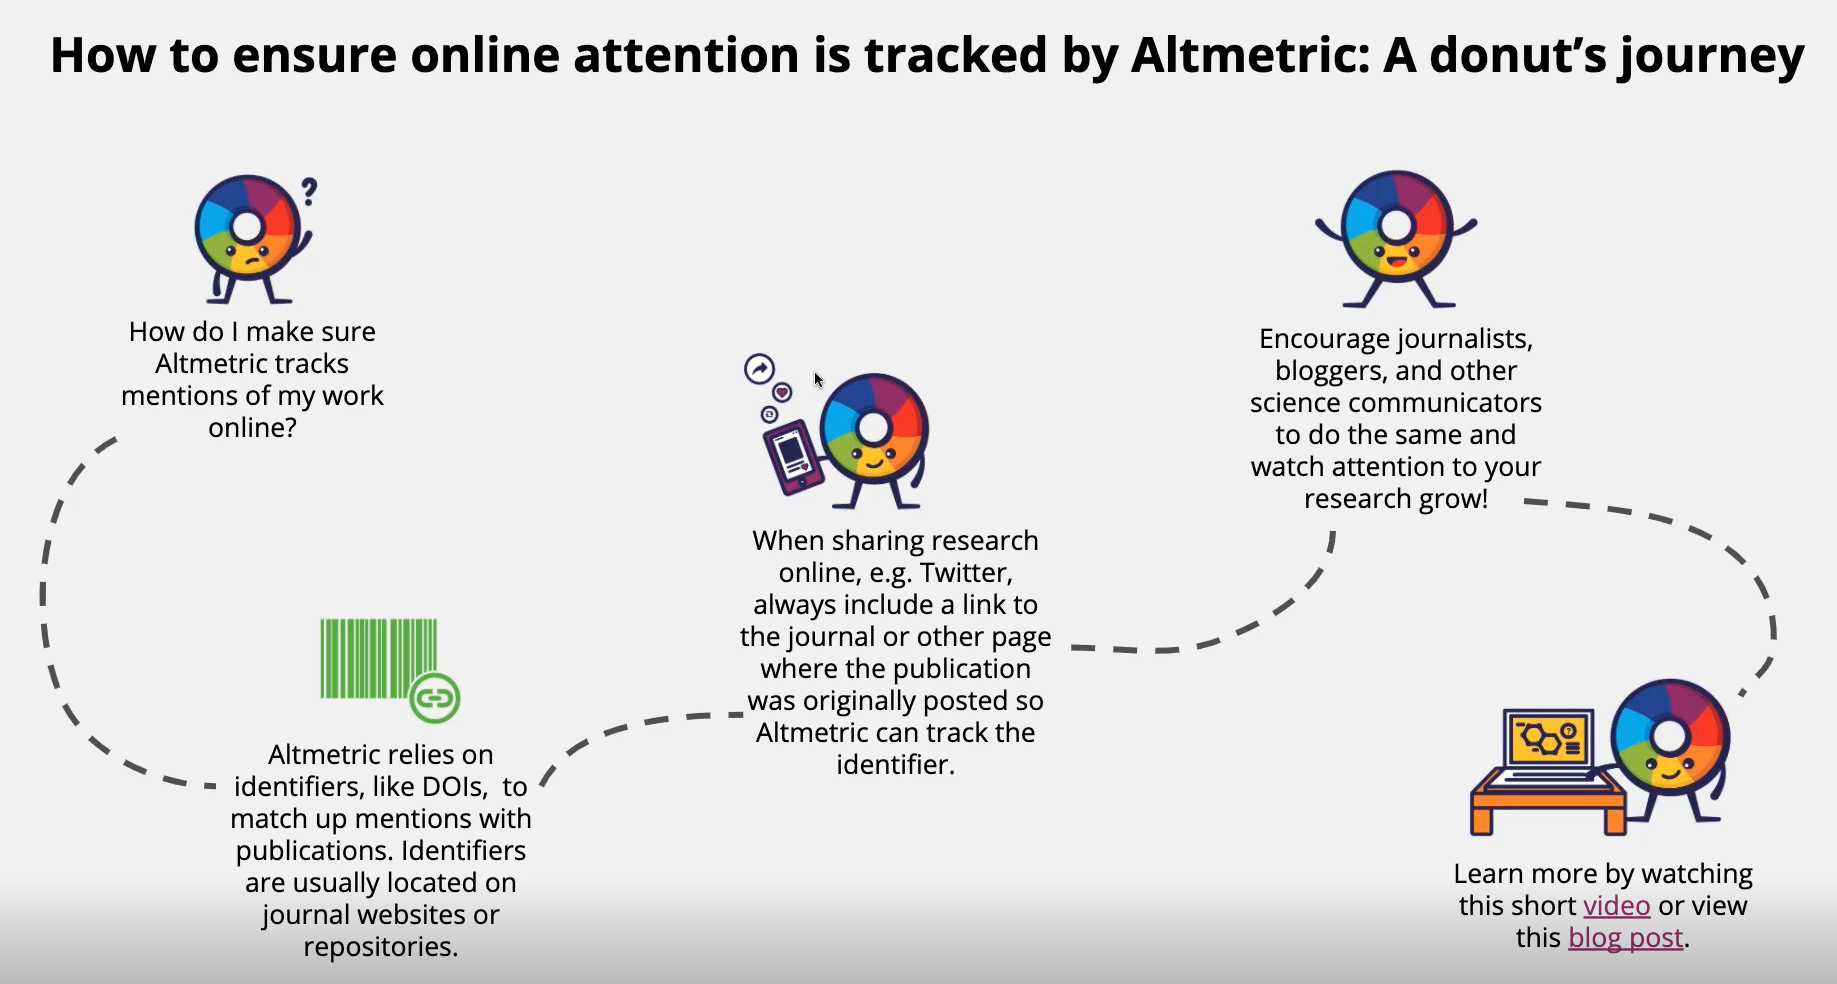 How to ensure online attention is tracked by Altmetric: A donut's journey infographic. Altmetrics relies on identifiers. When sharing research online include a link to the journal. Encourage others also link to the journal. Learn more by watching this video: https://altmetric.figshare.com/articles/media/How_to_ensure_attention_is_tracked_by_Altmetric/8242805?file=15368924. Blog: https://www.altmetric.com/blog/how-to-share-your-work-online/